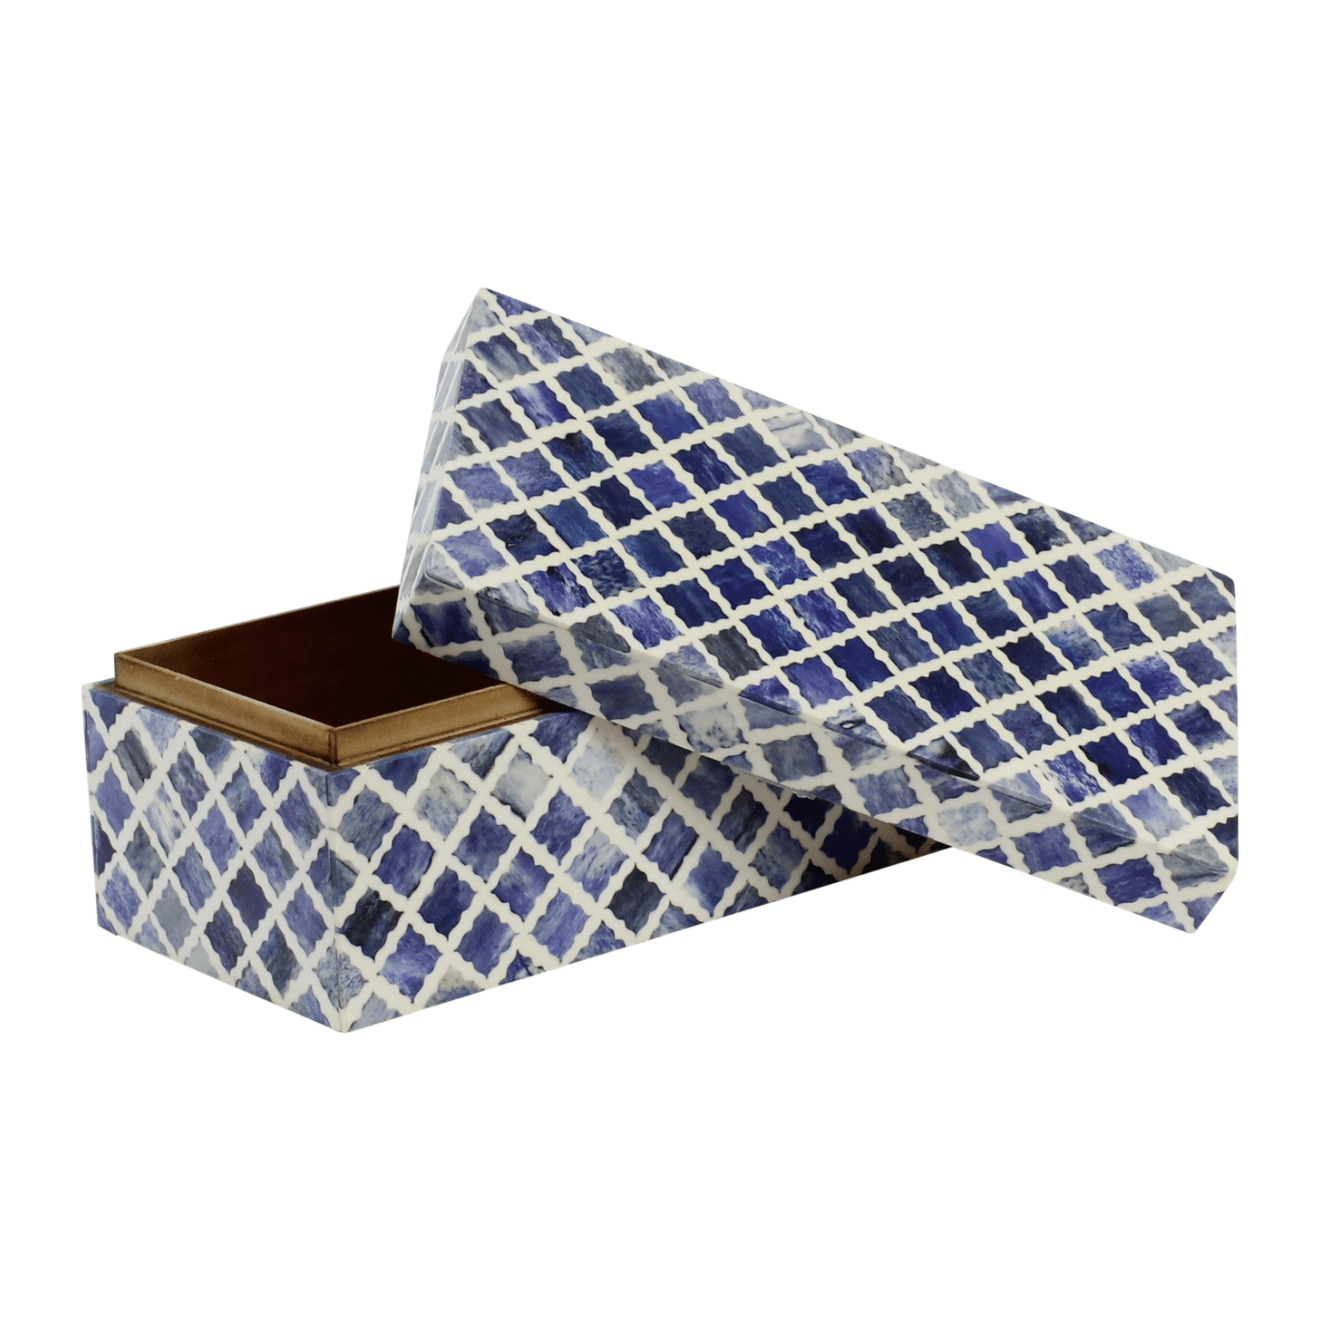 Stylish blue and white bone inlay box home decor and accessories for your coffee table and dining room blue and white wood bone